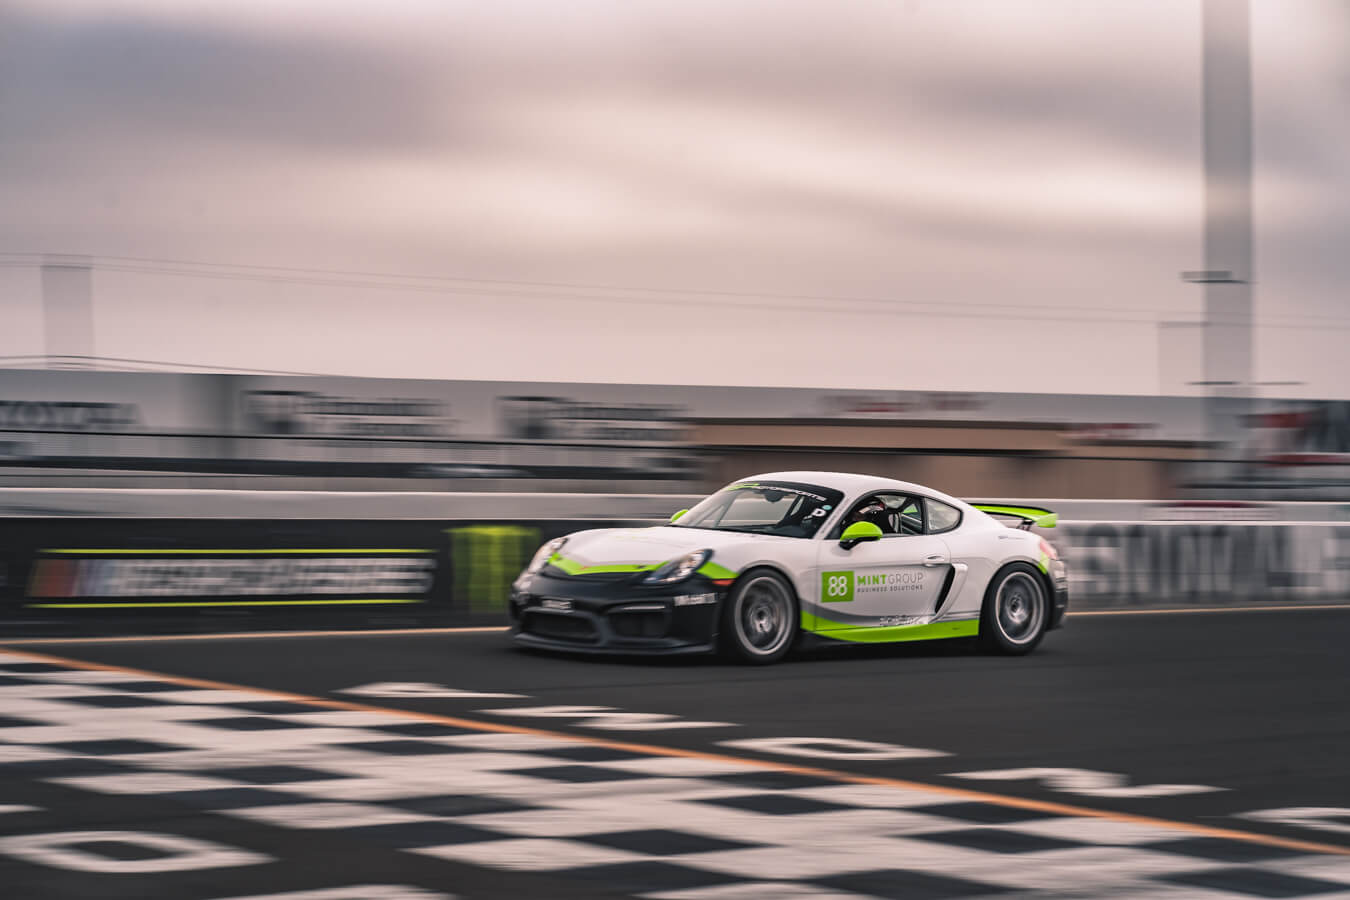 SP Motorsports Arrive and Drive GT4 Clubsport at Thunderhill